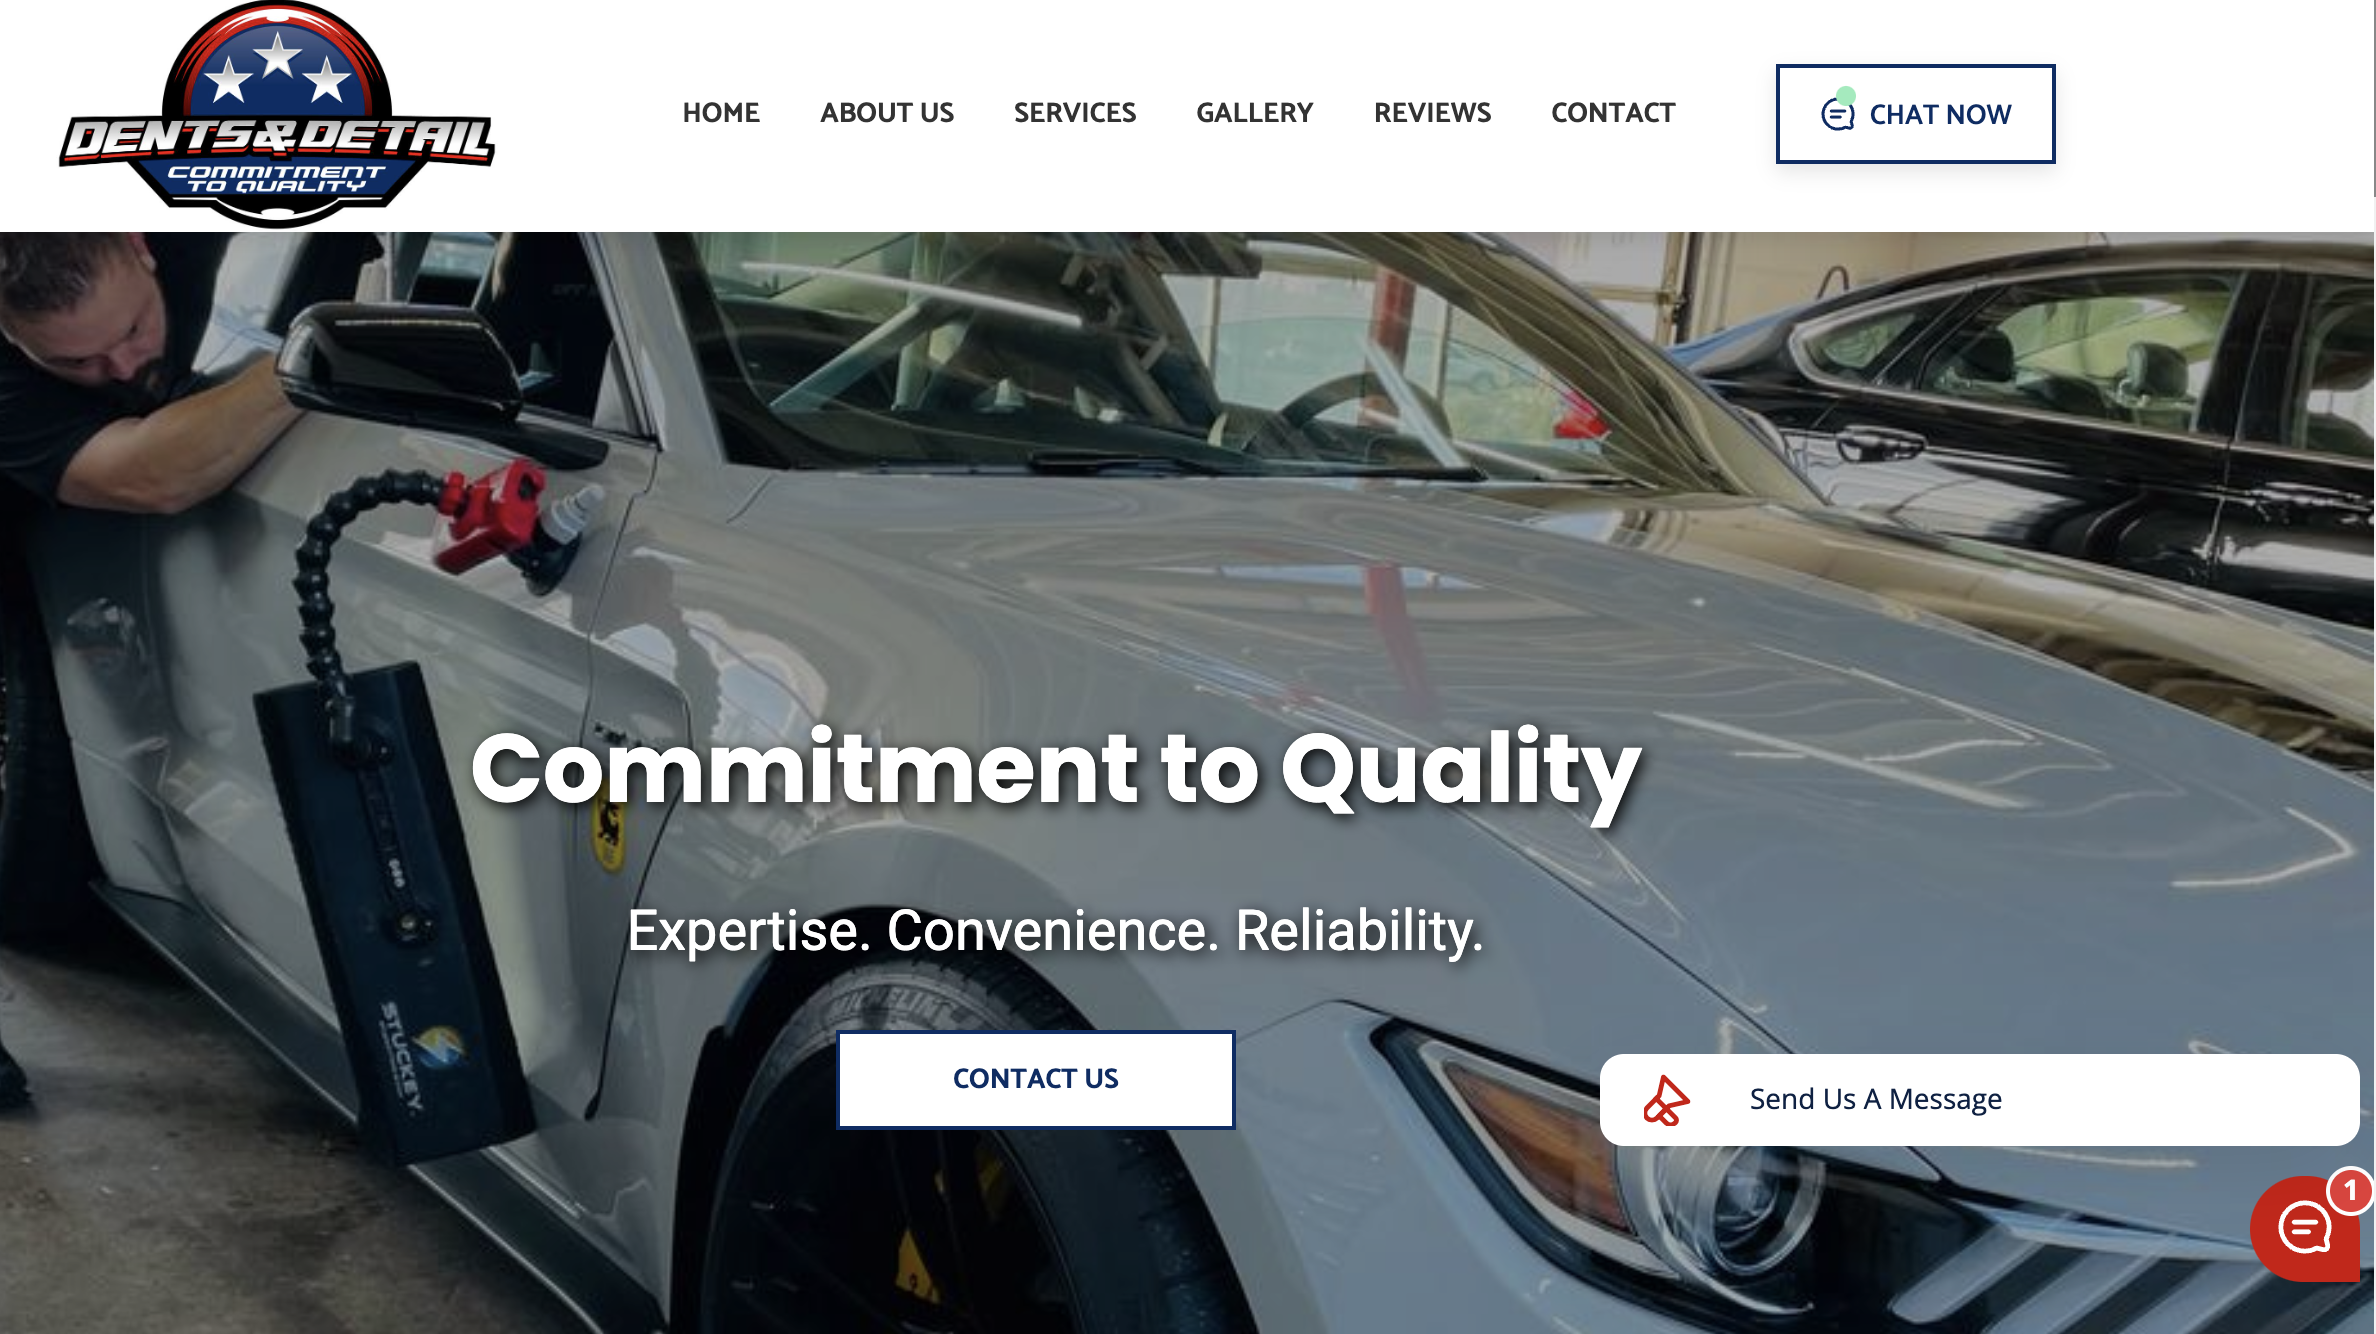 dents and detail commitment to quality best websites